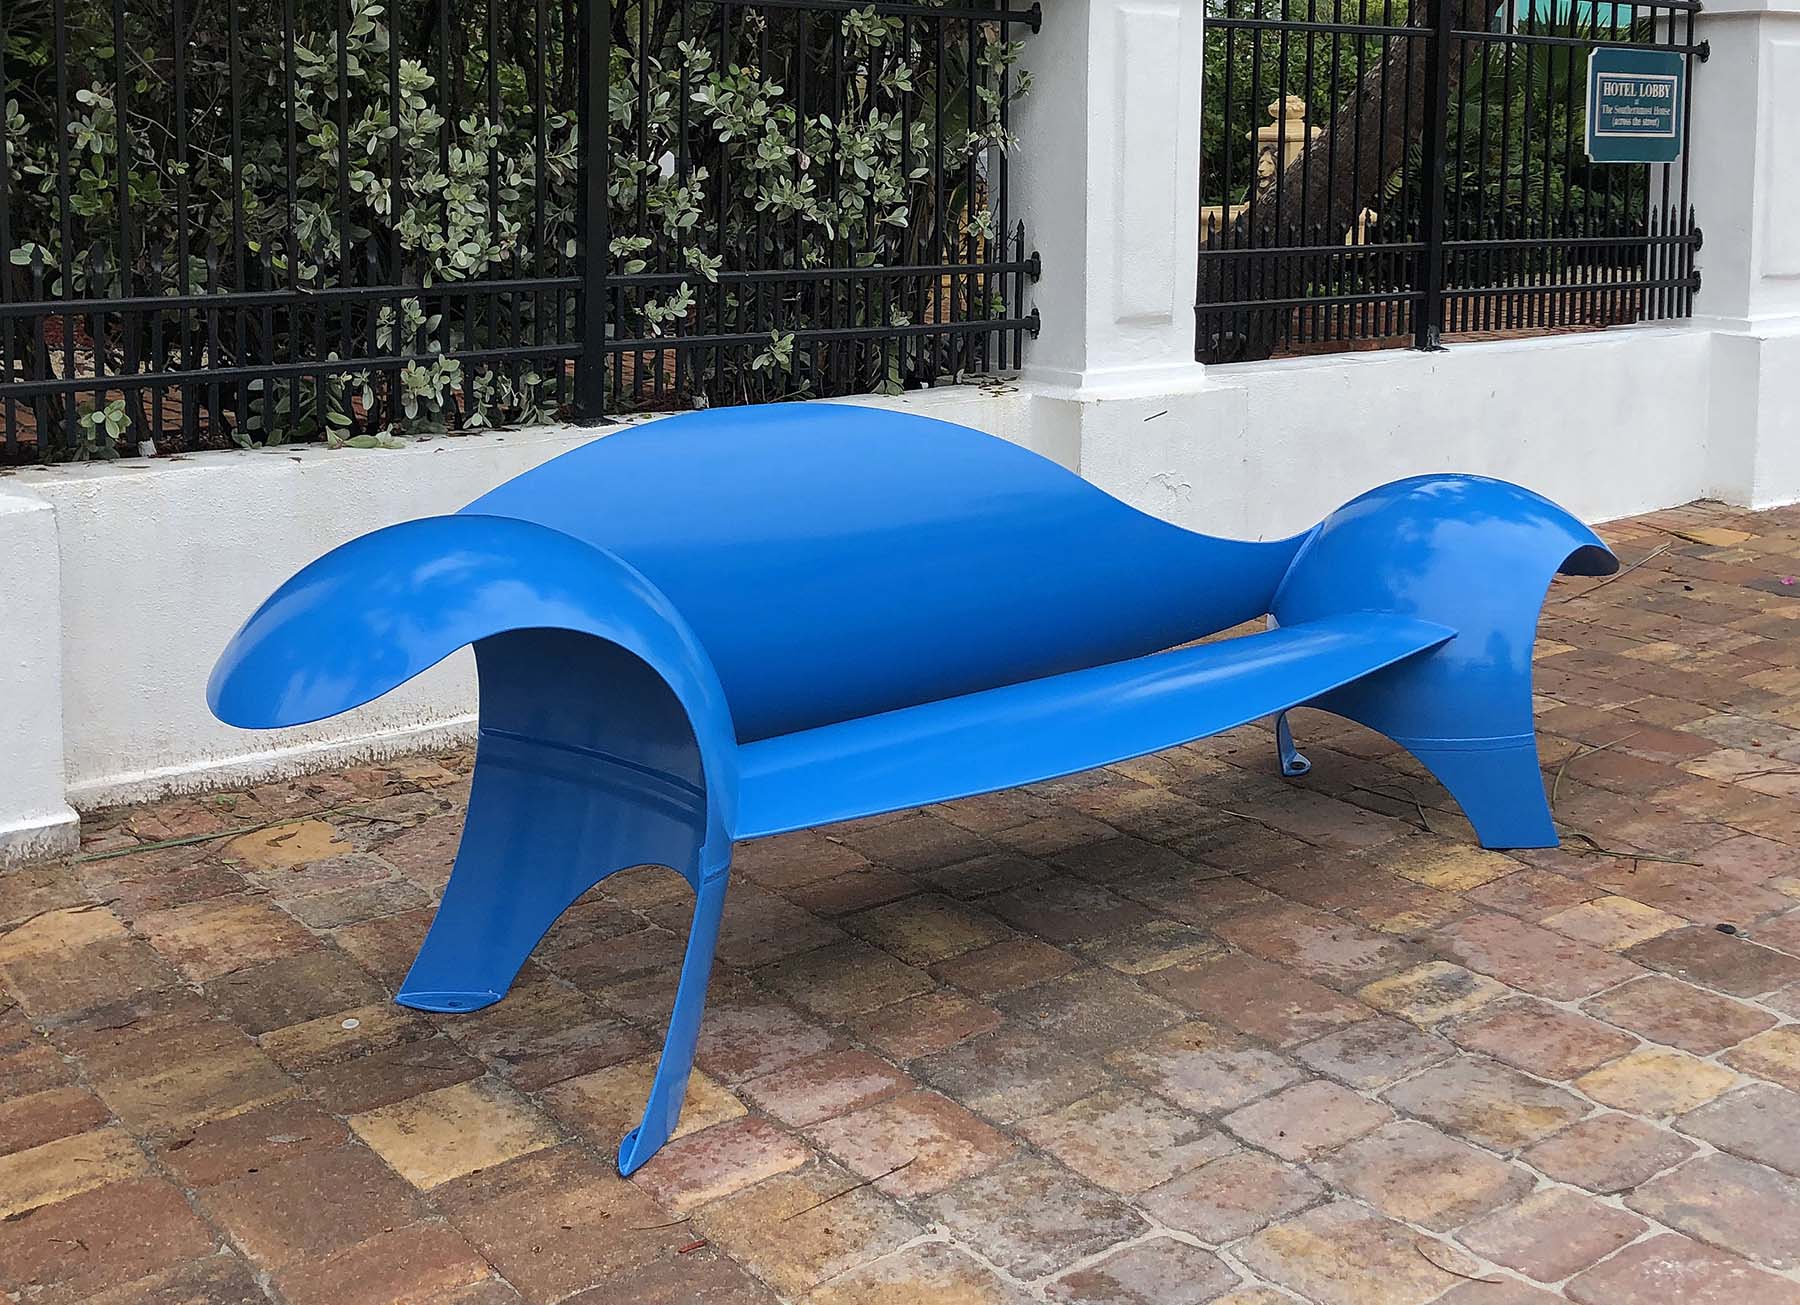 Colin Selig, Hemi Asymmetric Bench (2021). Outdoor metal seating crafted from repurposed scrap propane tank. Dimensions: 34” h x 120” w x 30” d with a 65” seat. ©Colin Selig 2021. Courtesy of the artist.